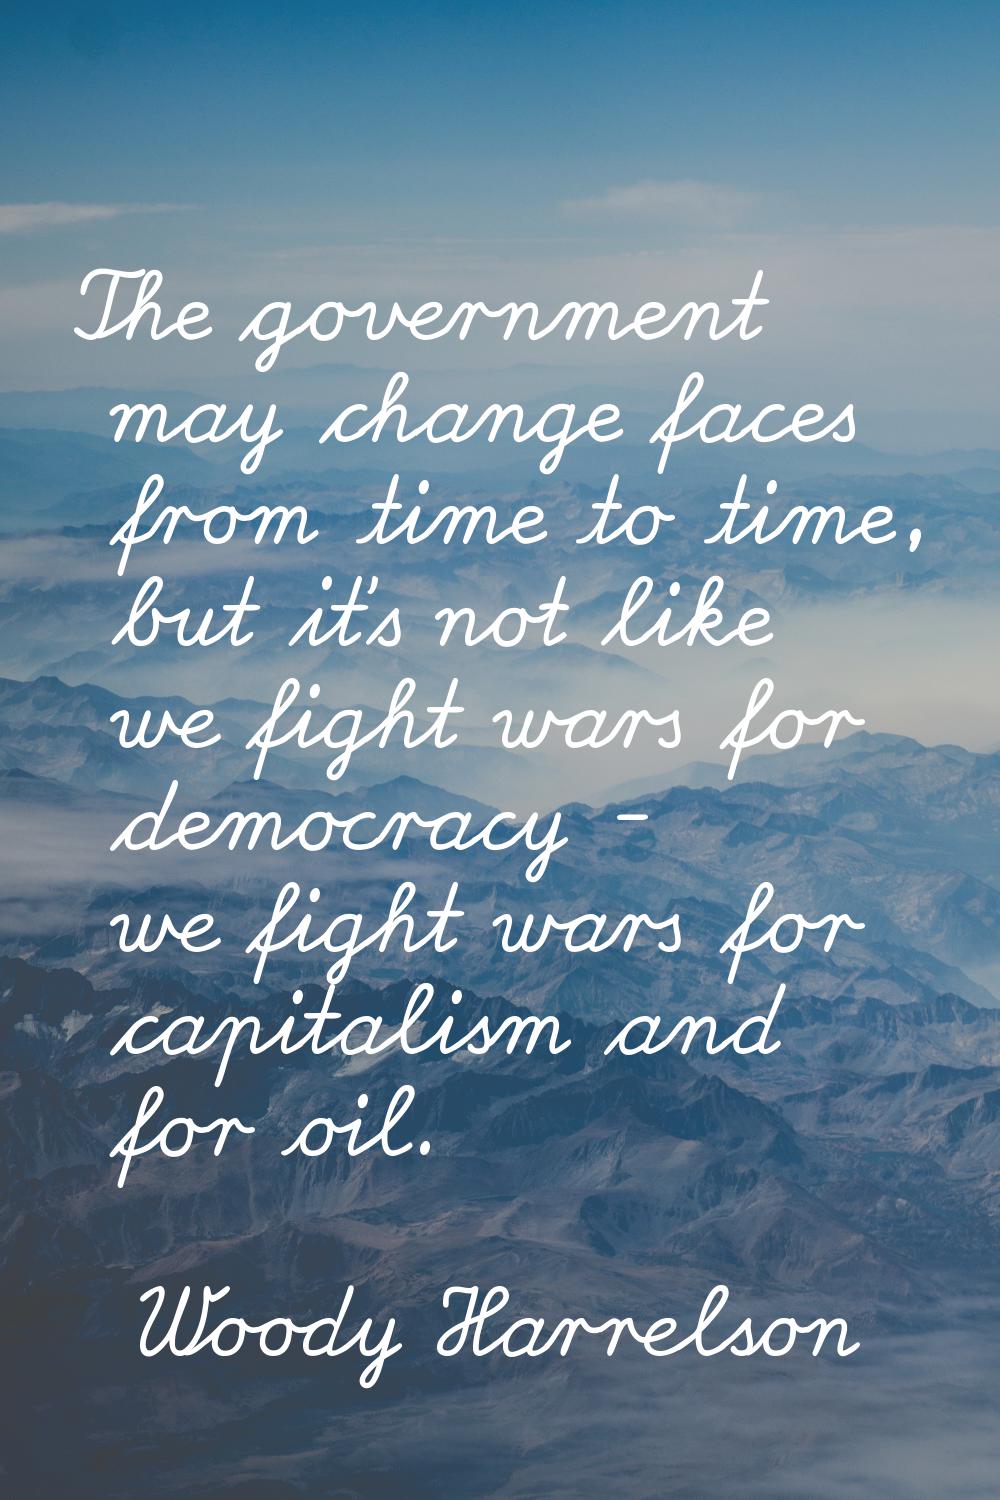 The government may change faces from time to time, but it's not like we fight wars for democracy - 